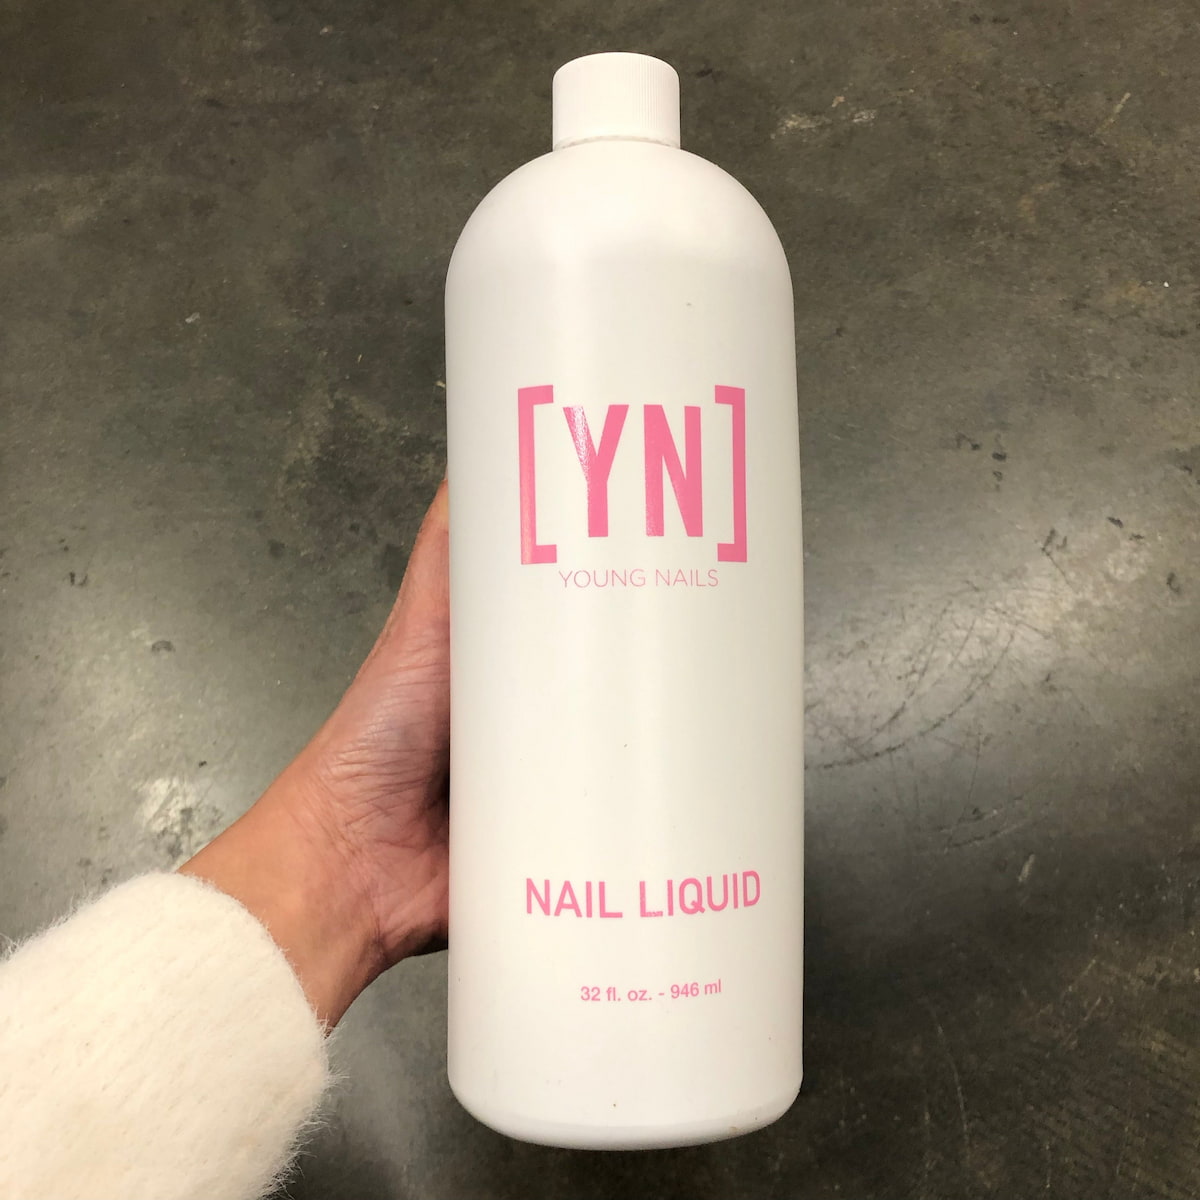 Young Nails Monomer 32 oz. is very popular for most nail technicians. Their Liquid is also one of the best monomer as Low Odor, Mess + MMA Free.